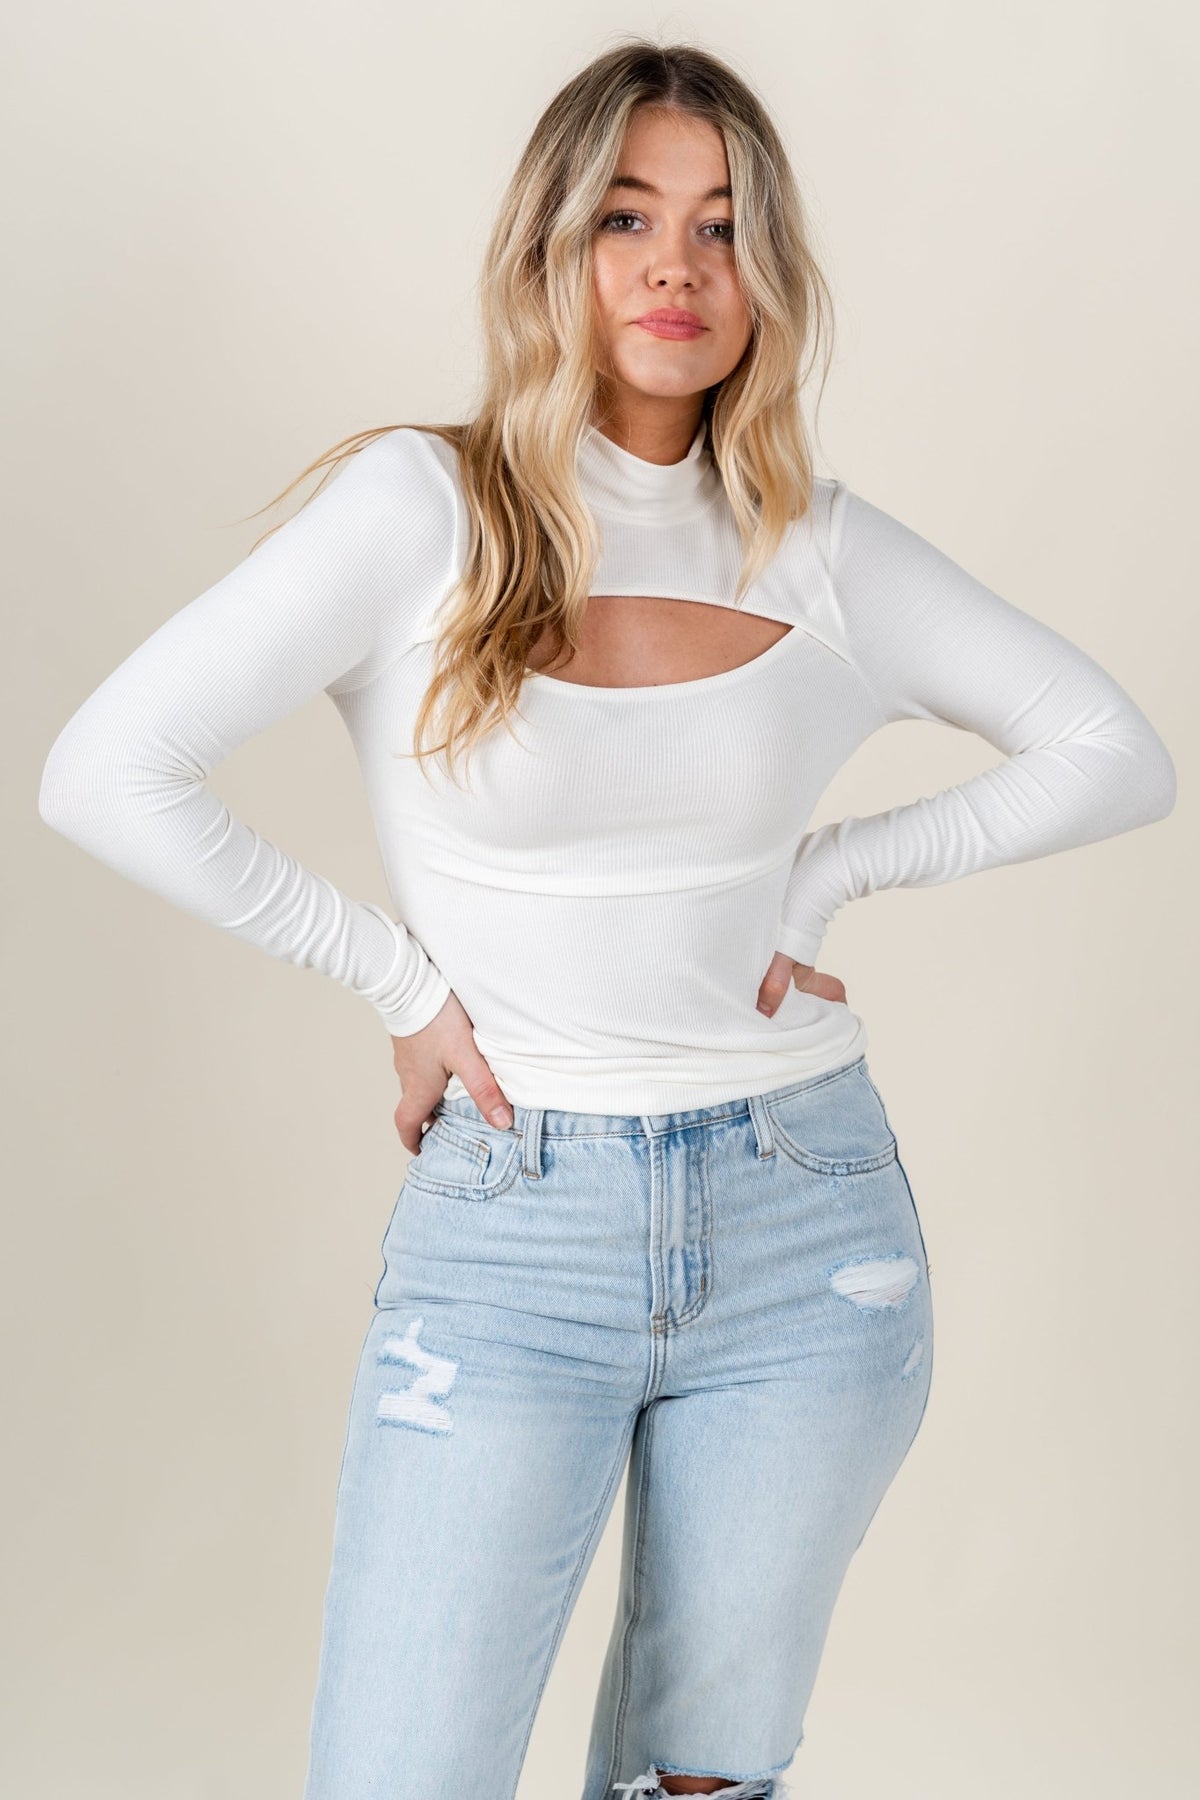 Z Supply Pandora ribbed top sandstone - Z Supply Top - Z Supply Tops, Dresses, Tanks, Tees, Cardigans, Joggers and Loungewear at Lush Fashion Lounge